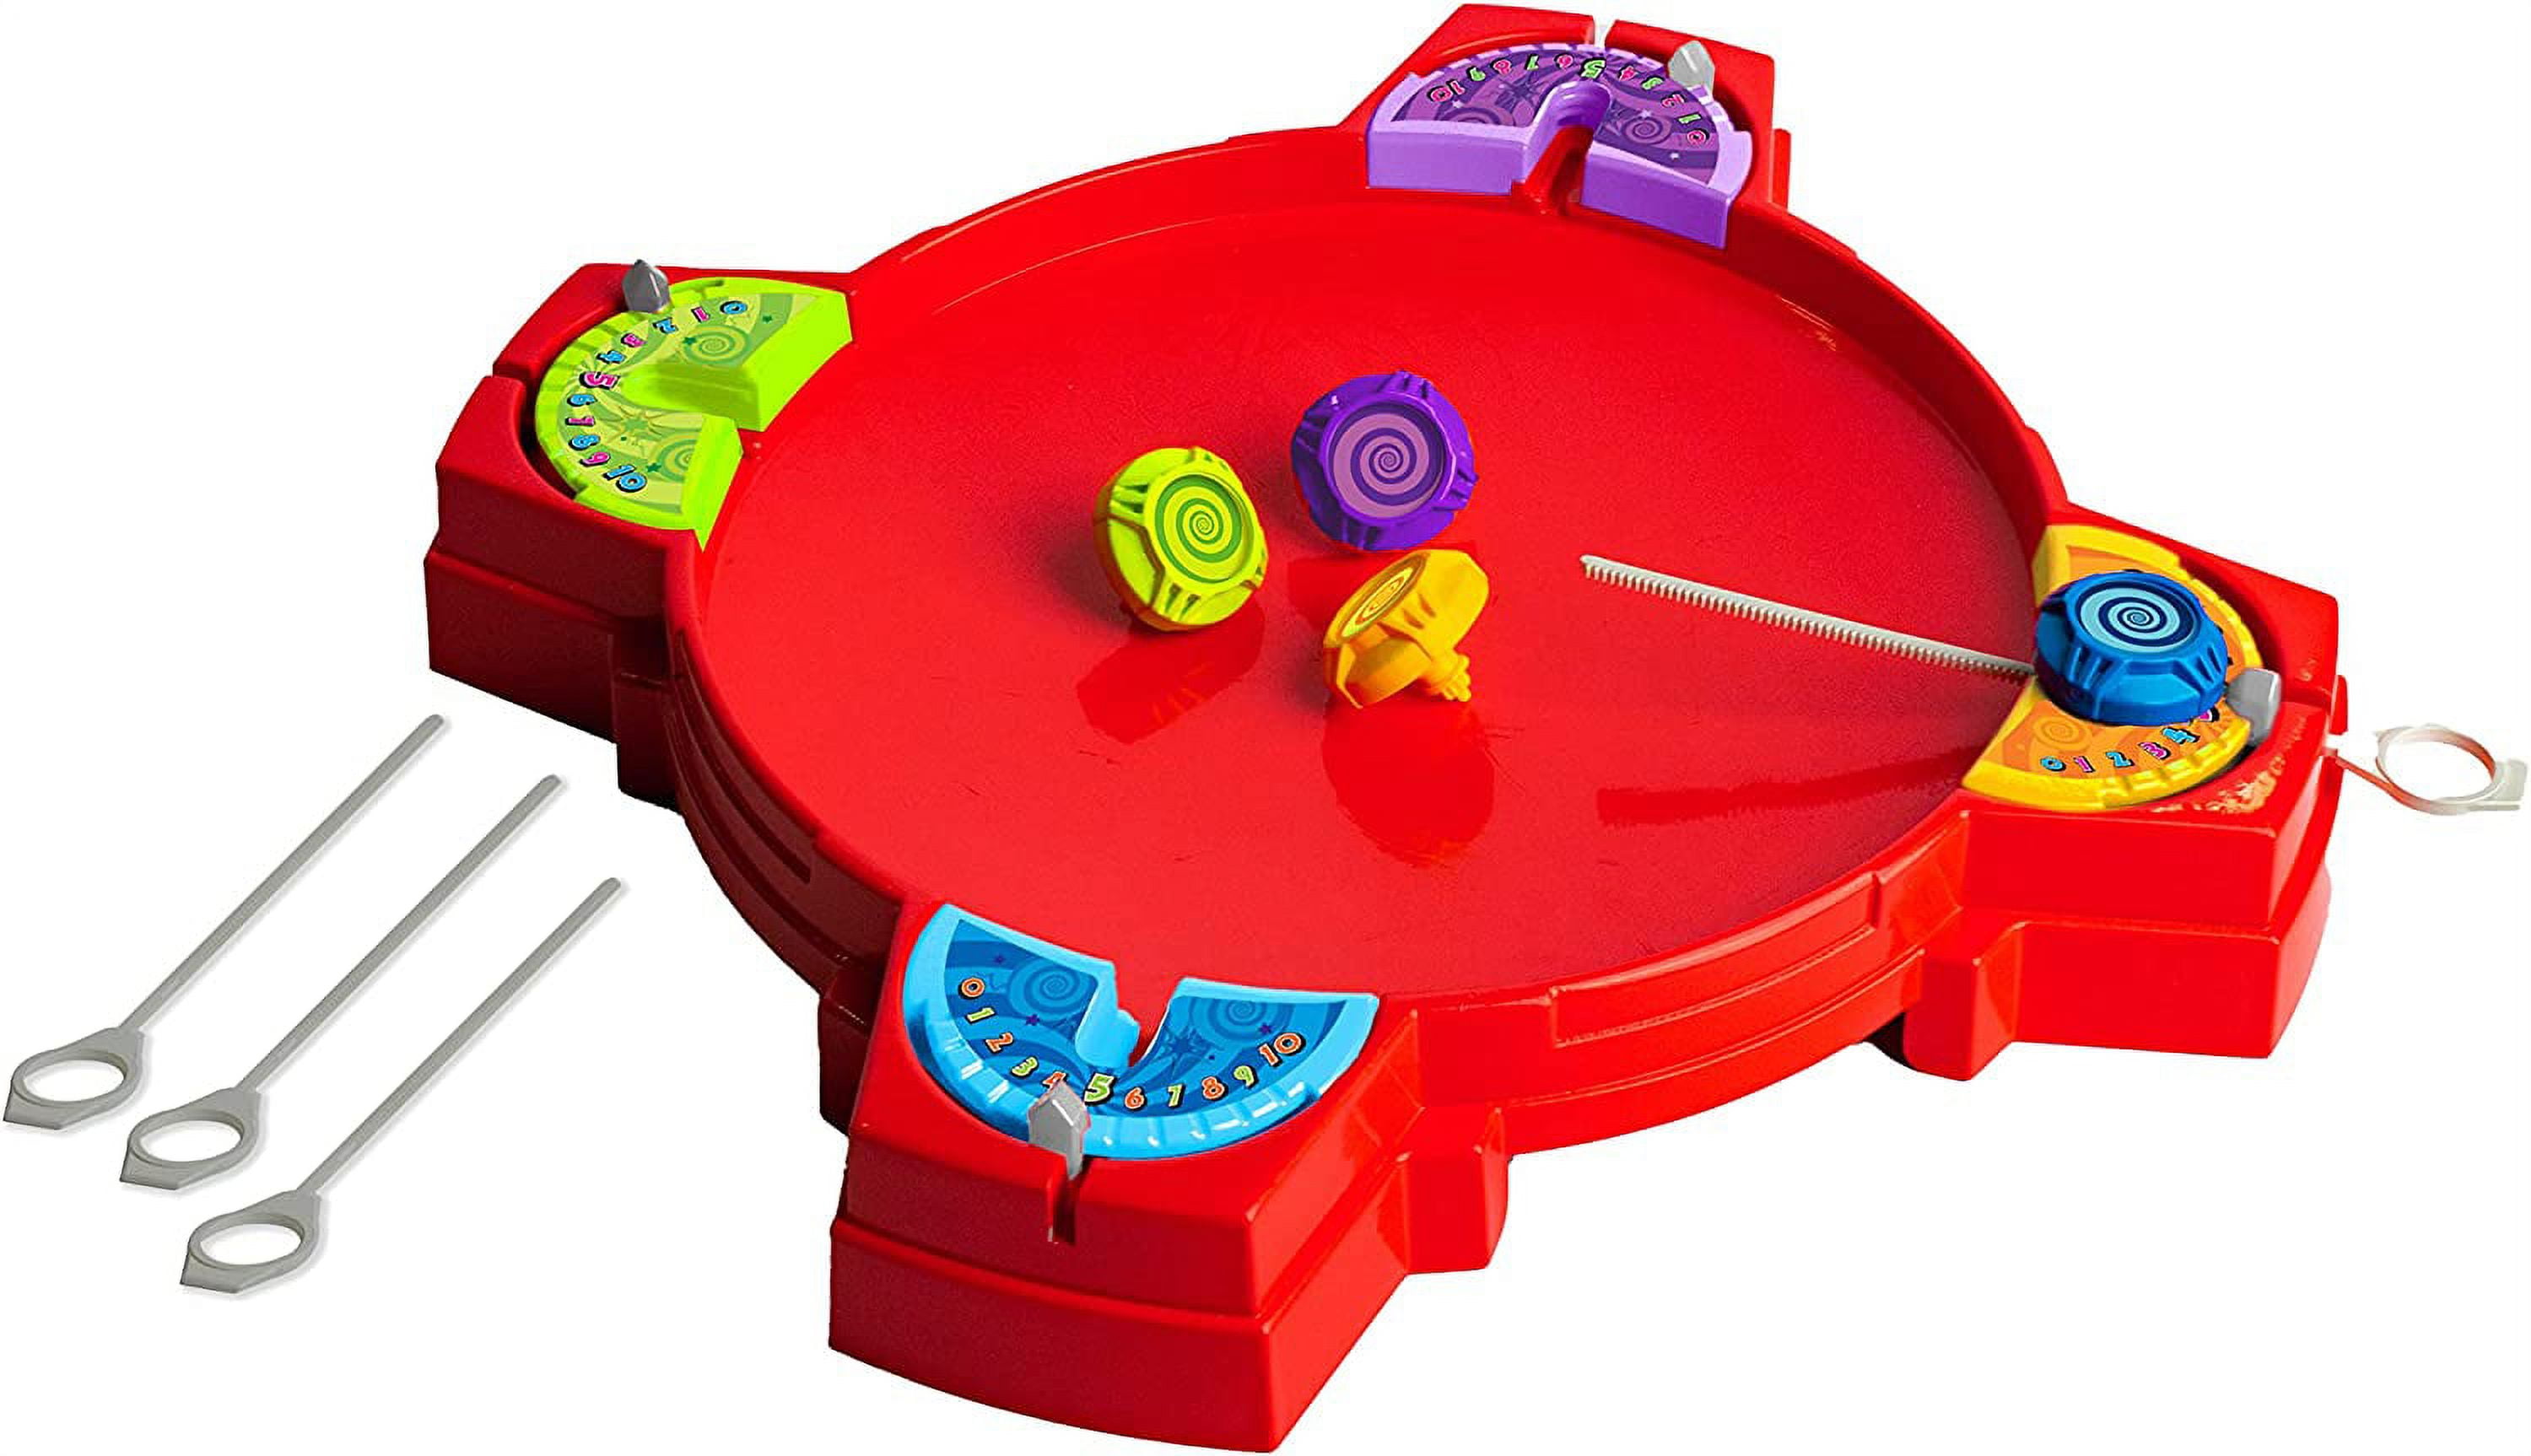 Battling Tops - The Original Classic Spinning Tops Game Set for 2 - 4 Kids.  Insert, Press & Pull! Drop Battle Gyros In The Stadium To Combat with Each  Other. Ages 6+ Boys & Girls